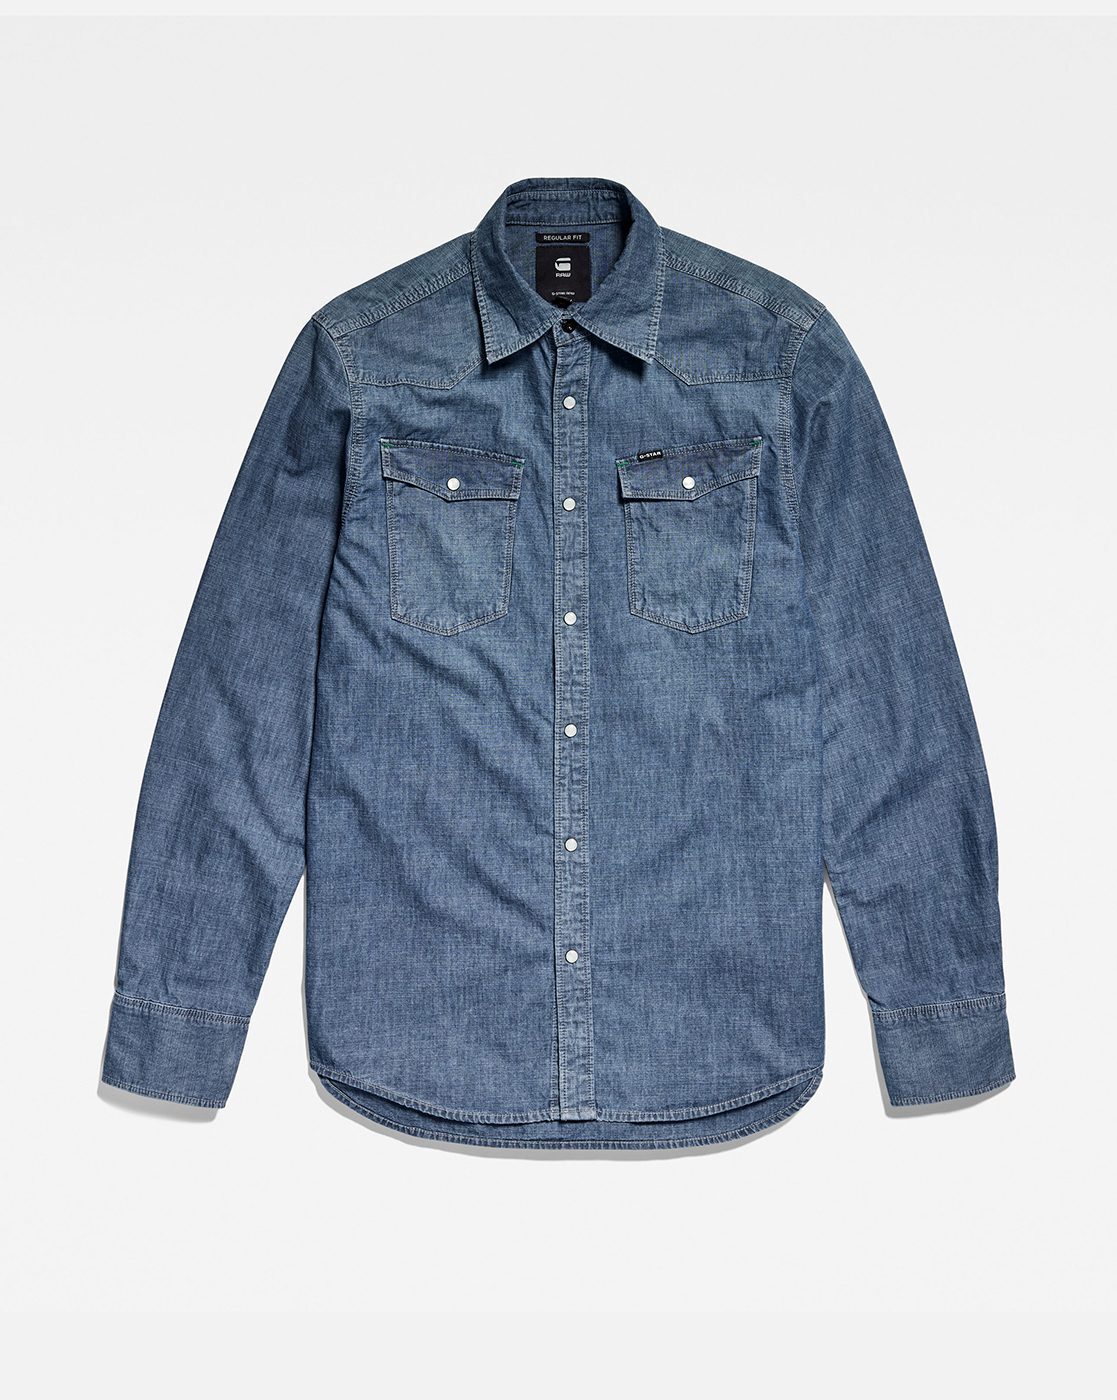 Raw denim military shirt by Firm Clothing | The Secret Label